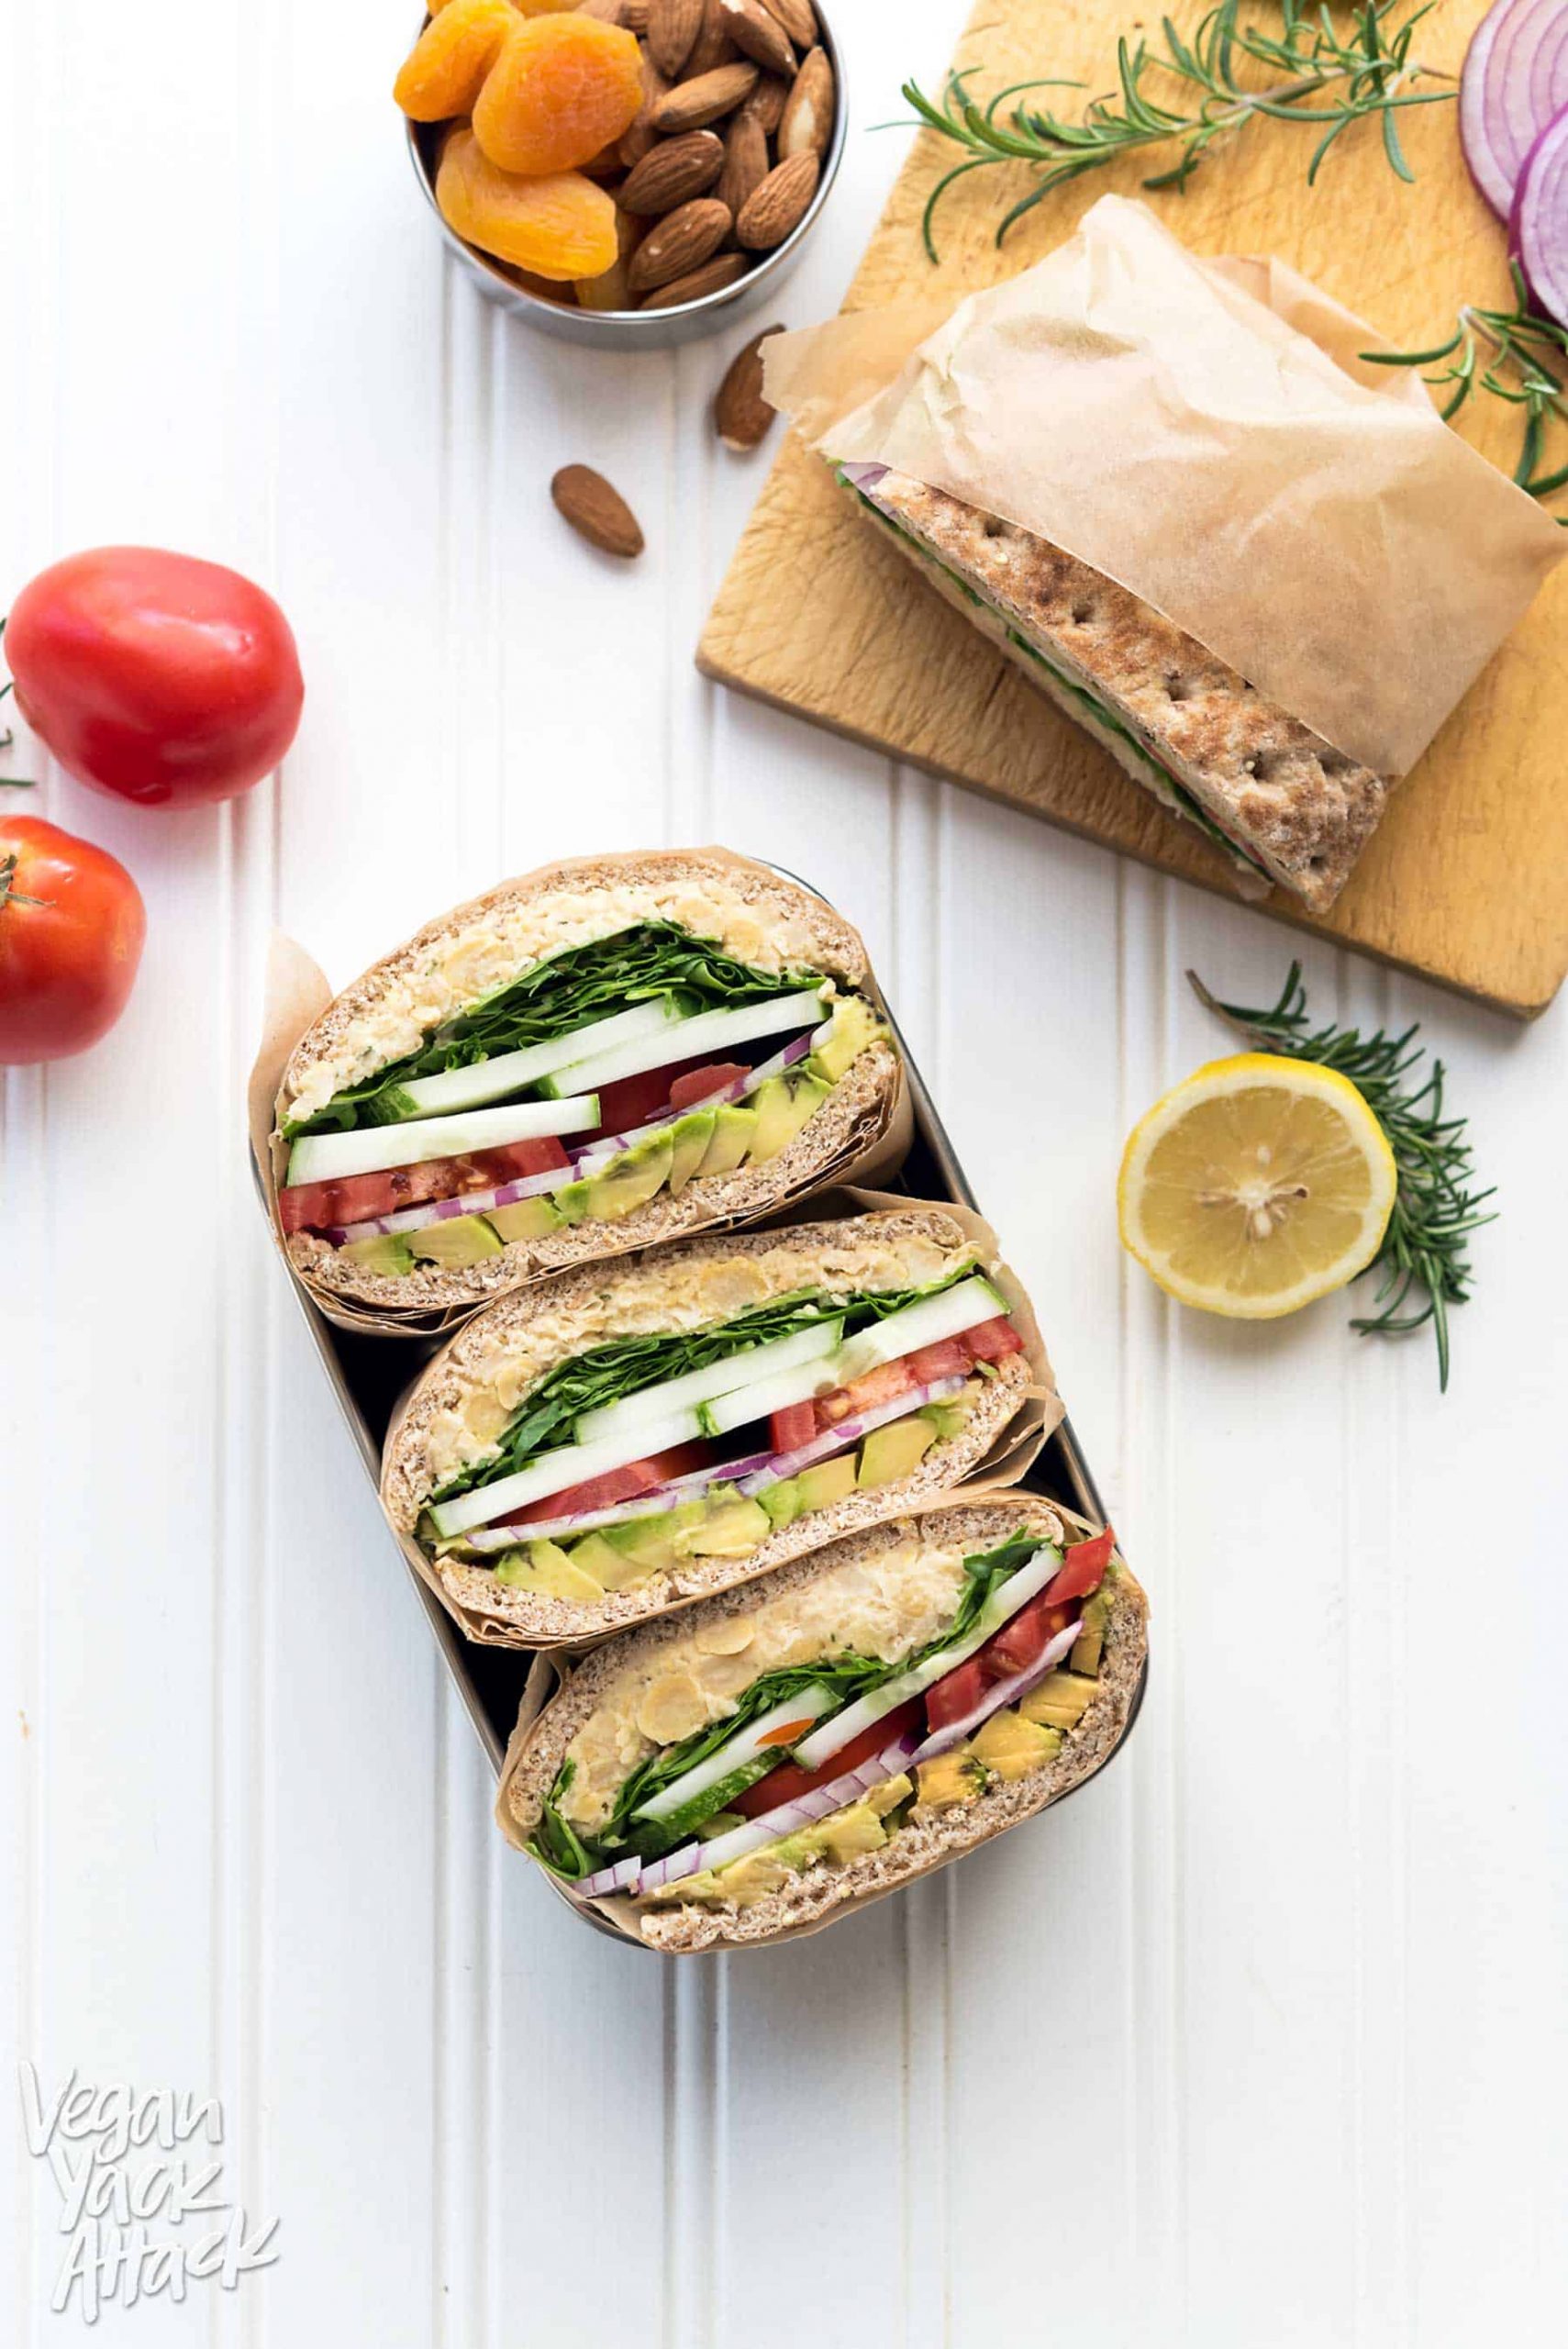 Sliced rosemary chickpea salad sandwiches in a lunch container on a white background